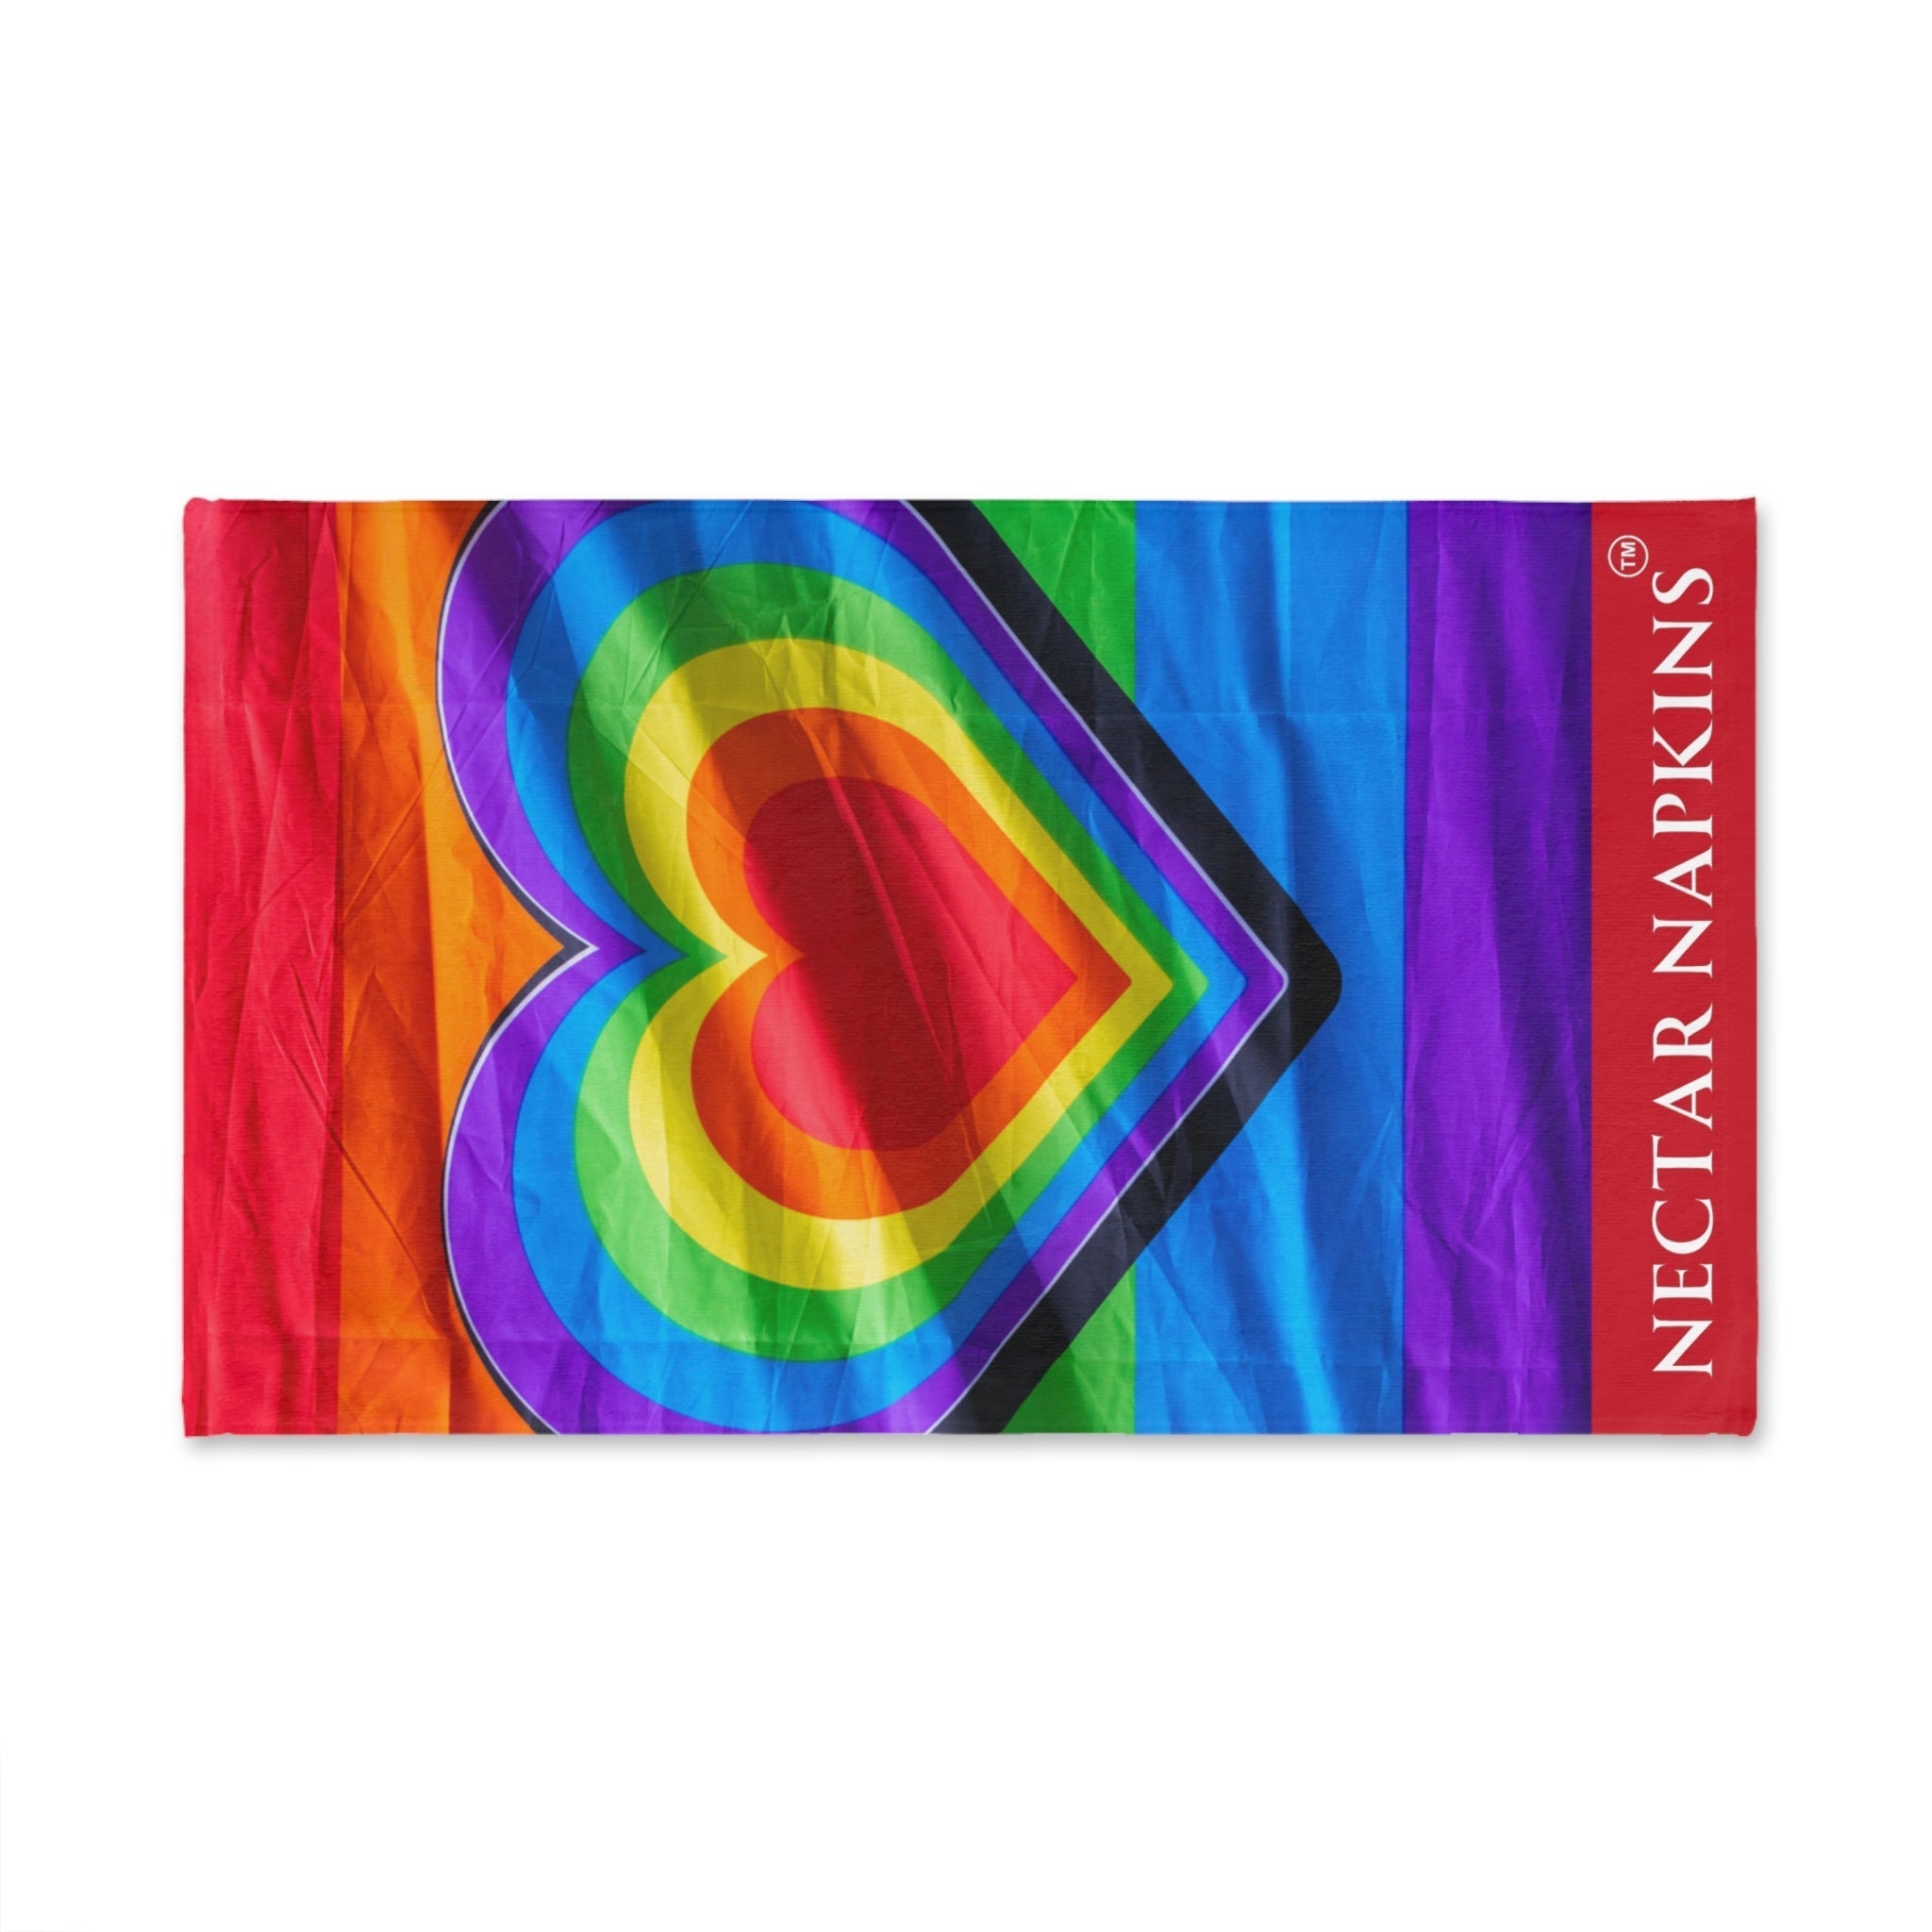 Rain Bow Heart 3D Red | Sexy Gifts for Boyfriend, Funny Towel Romantic Gift for Wedding Couple Fiance First Year 2nd Anniversary Valentines, Party Gag Gifts, Joke Humor Cloth for Husband Men BF NECTAR NAPKINS